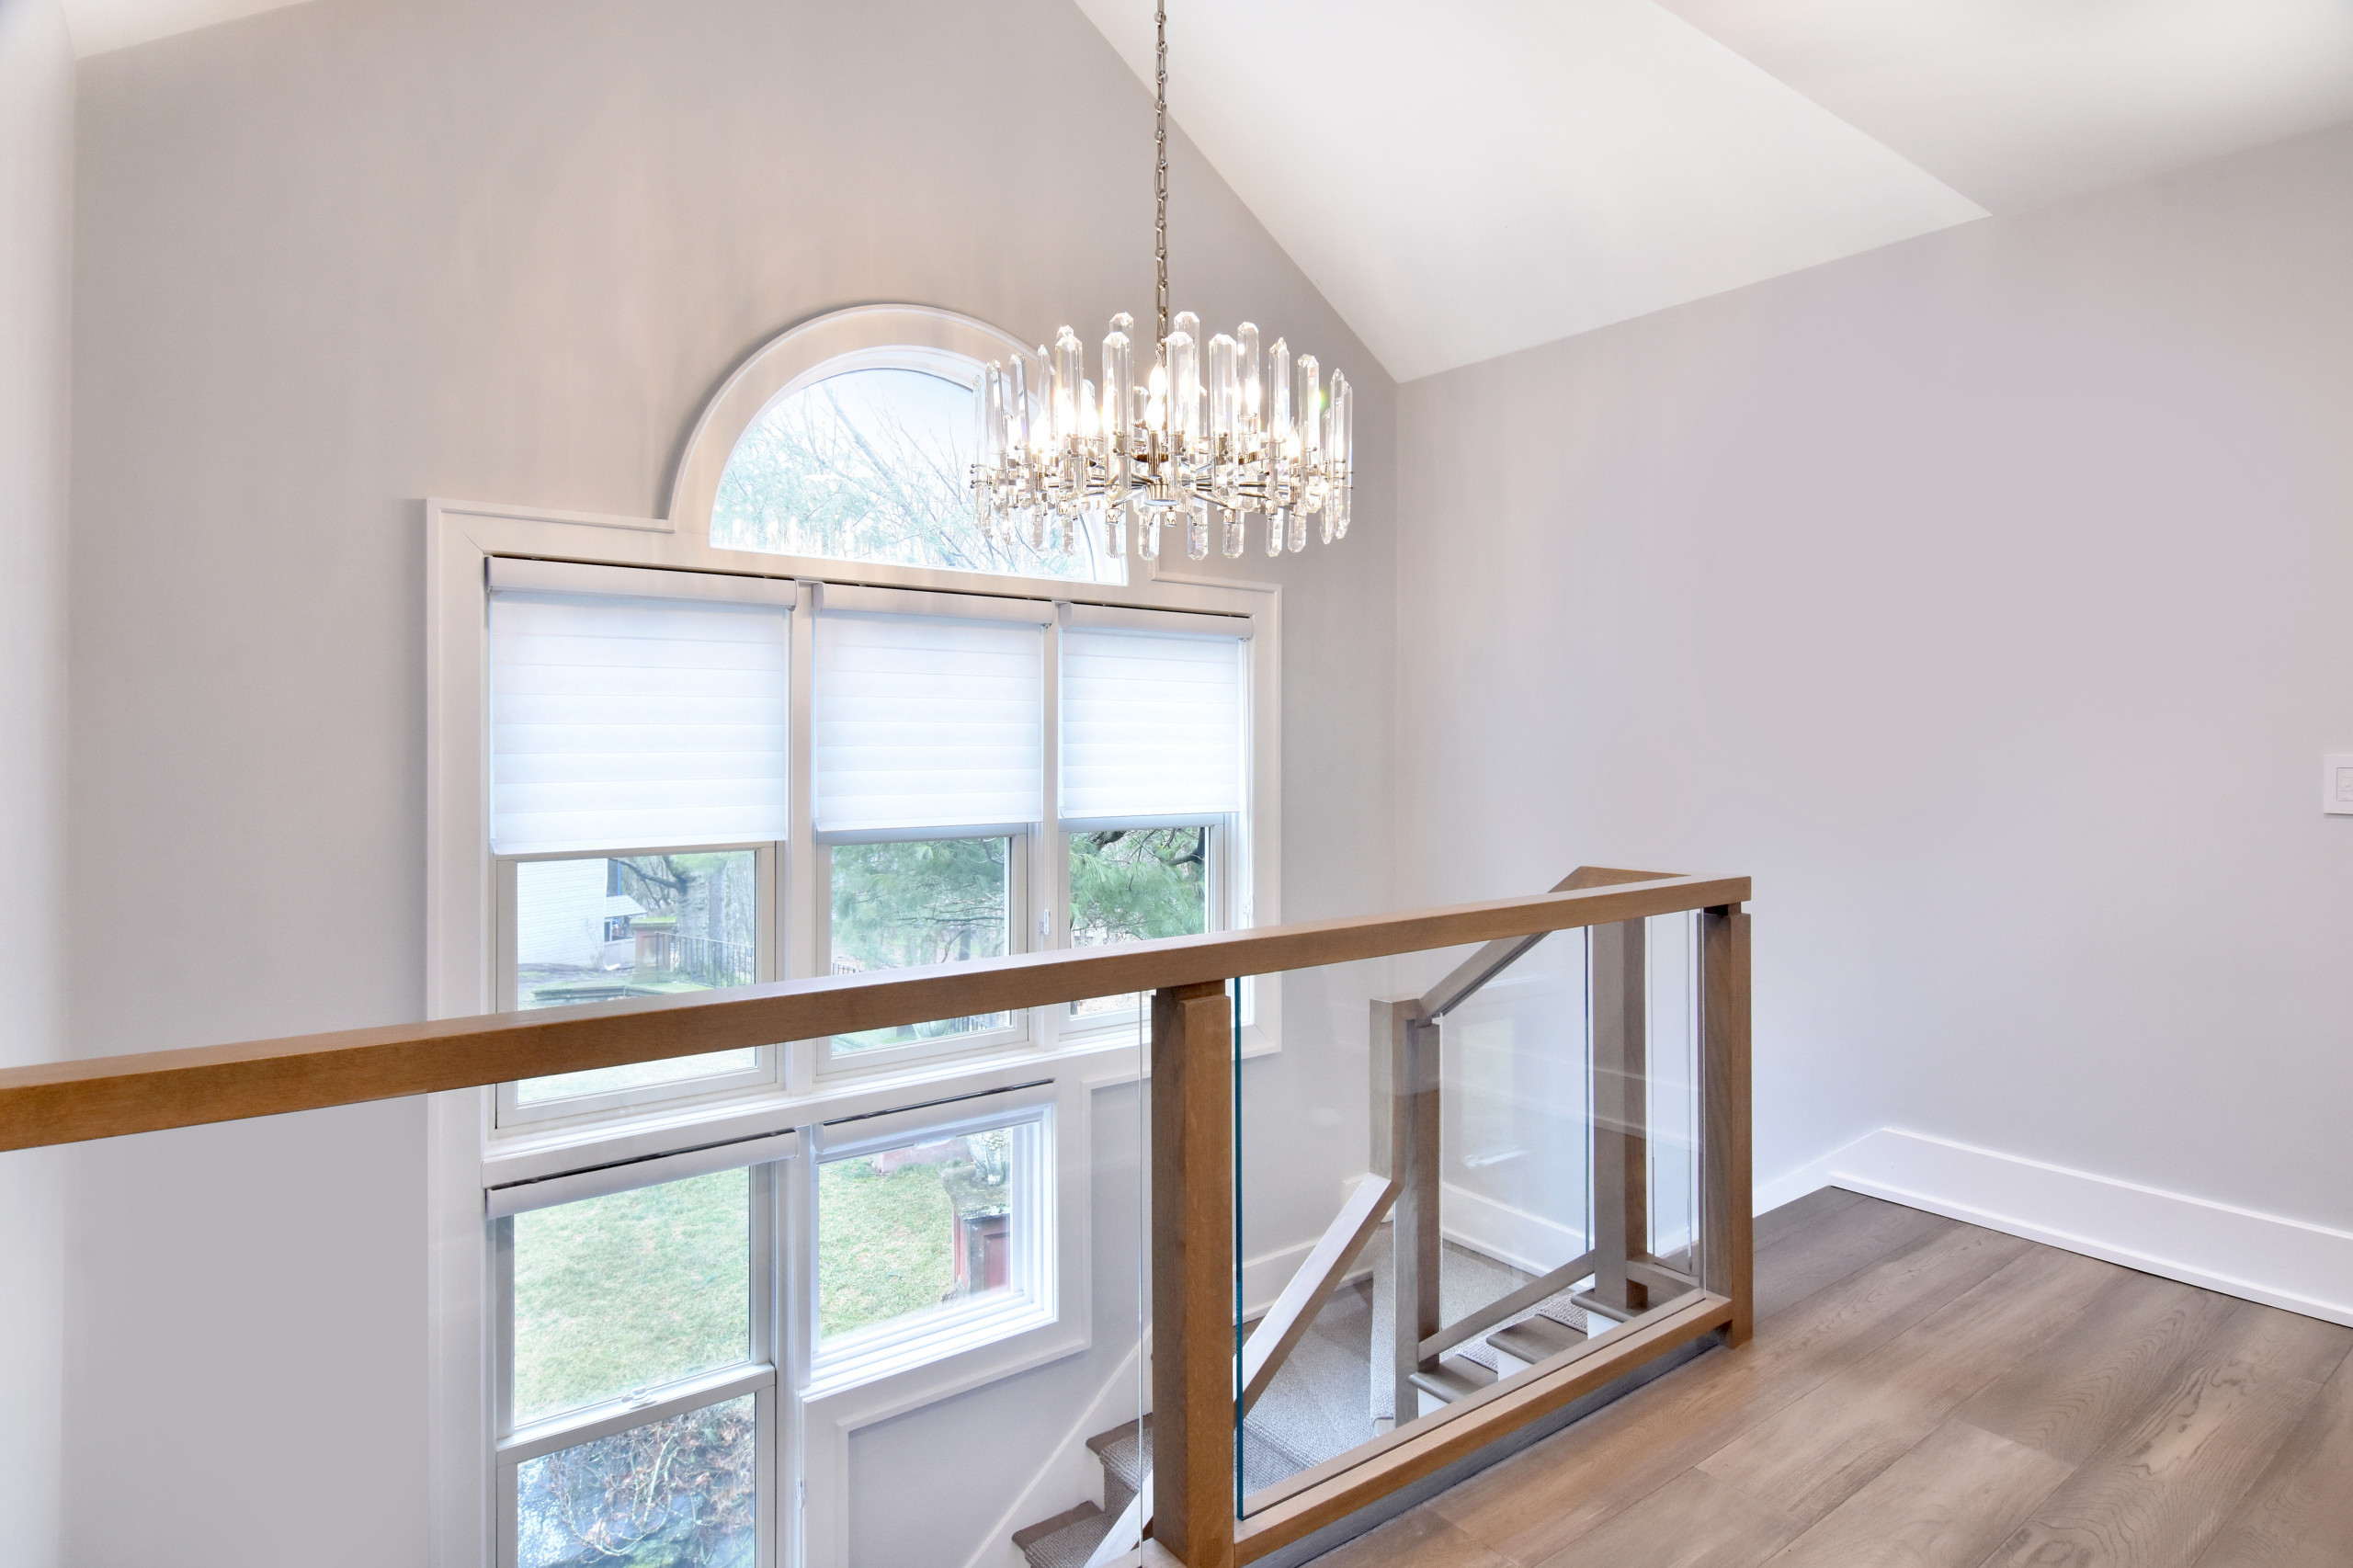 Irvington Home - Staircase Remodel